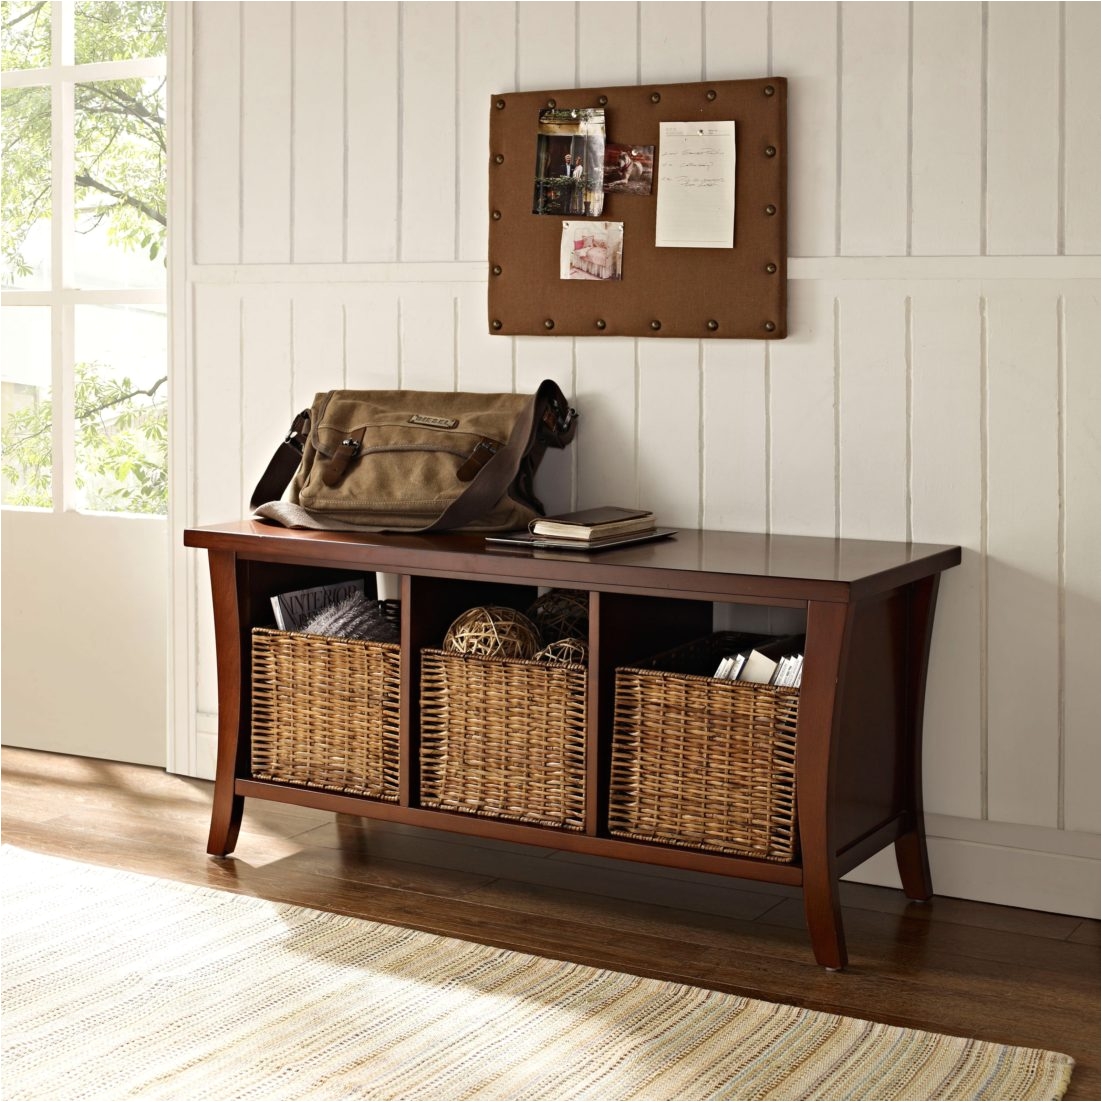 Narrow Entryway Bench Small Entryway Table Lovely Ndash Fitspiredme Home Design New 24